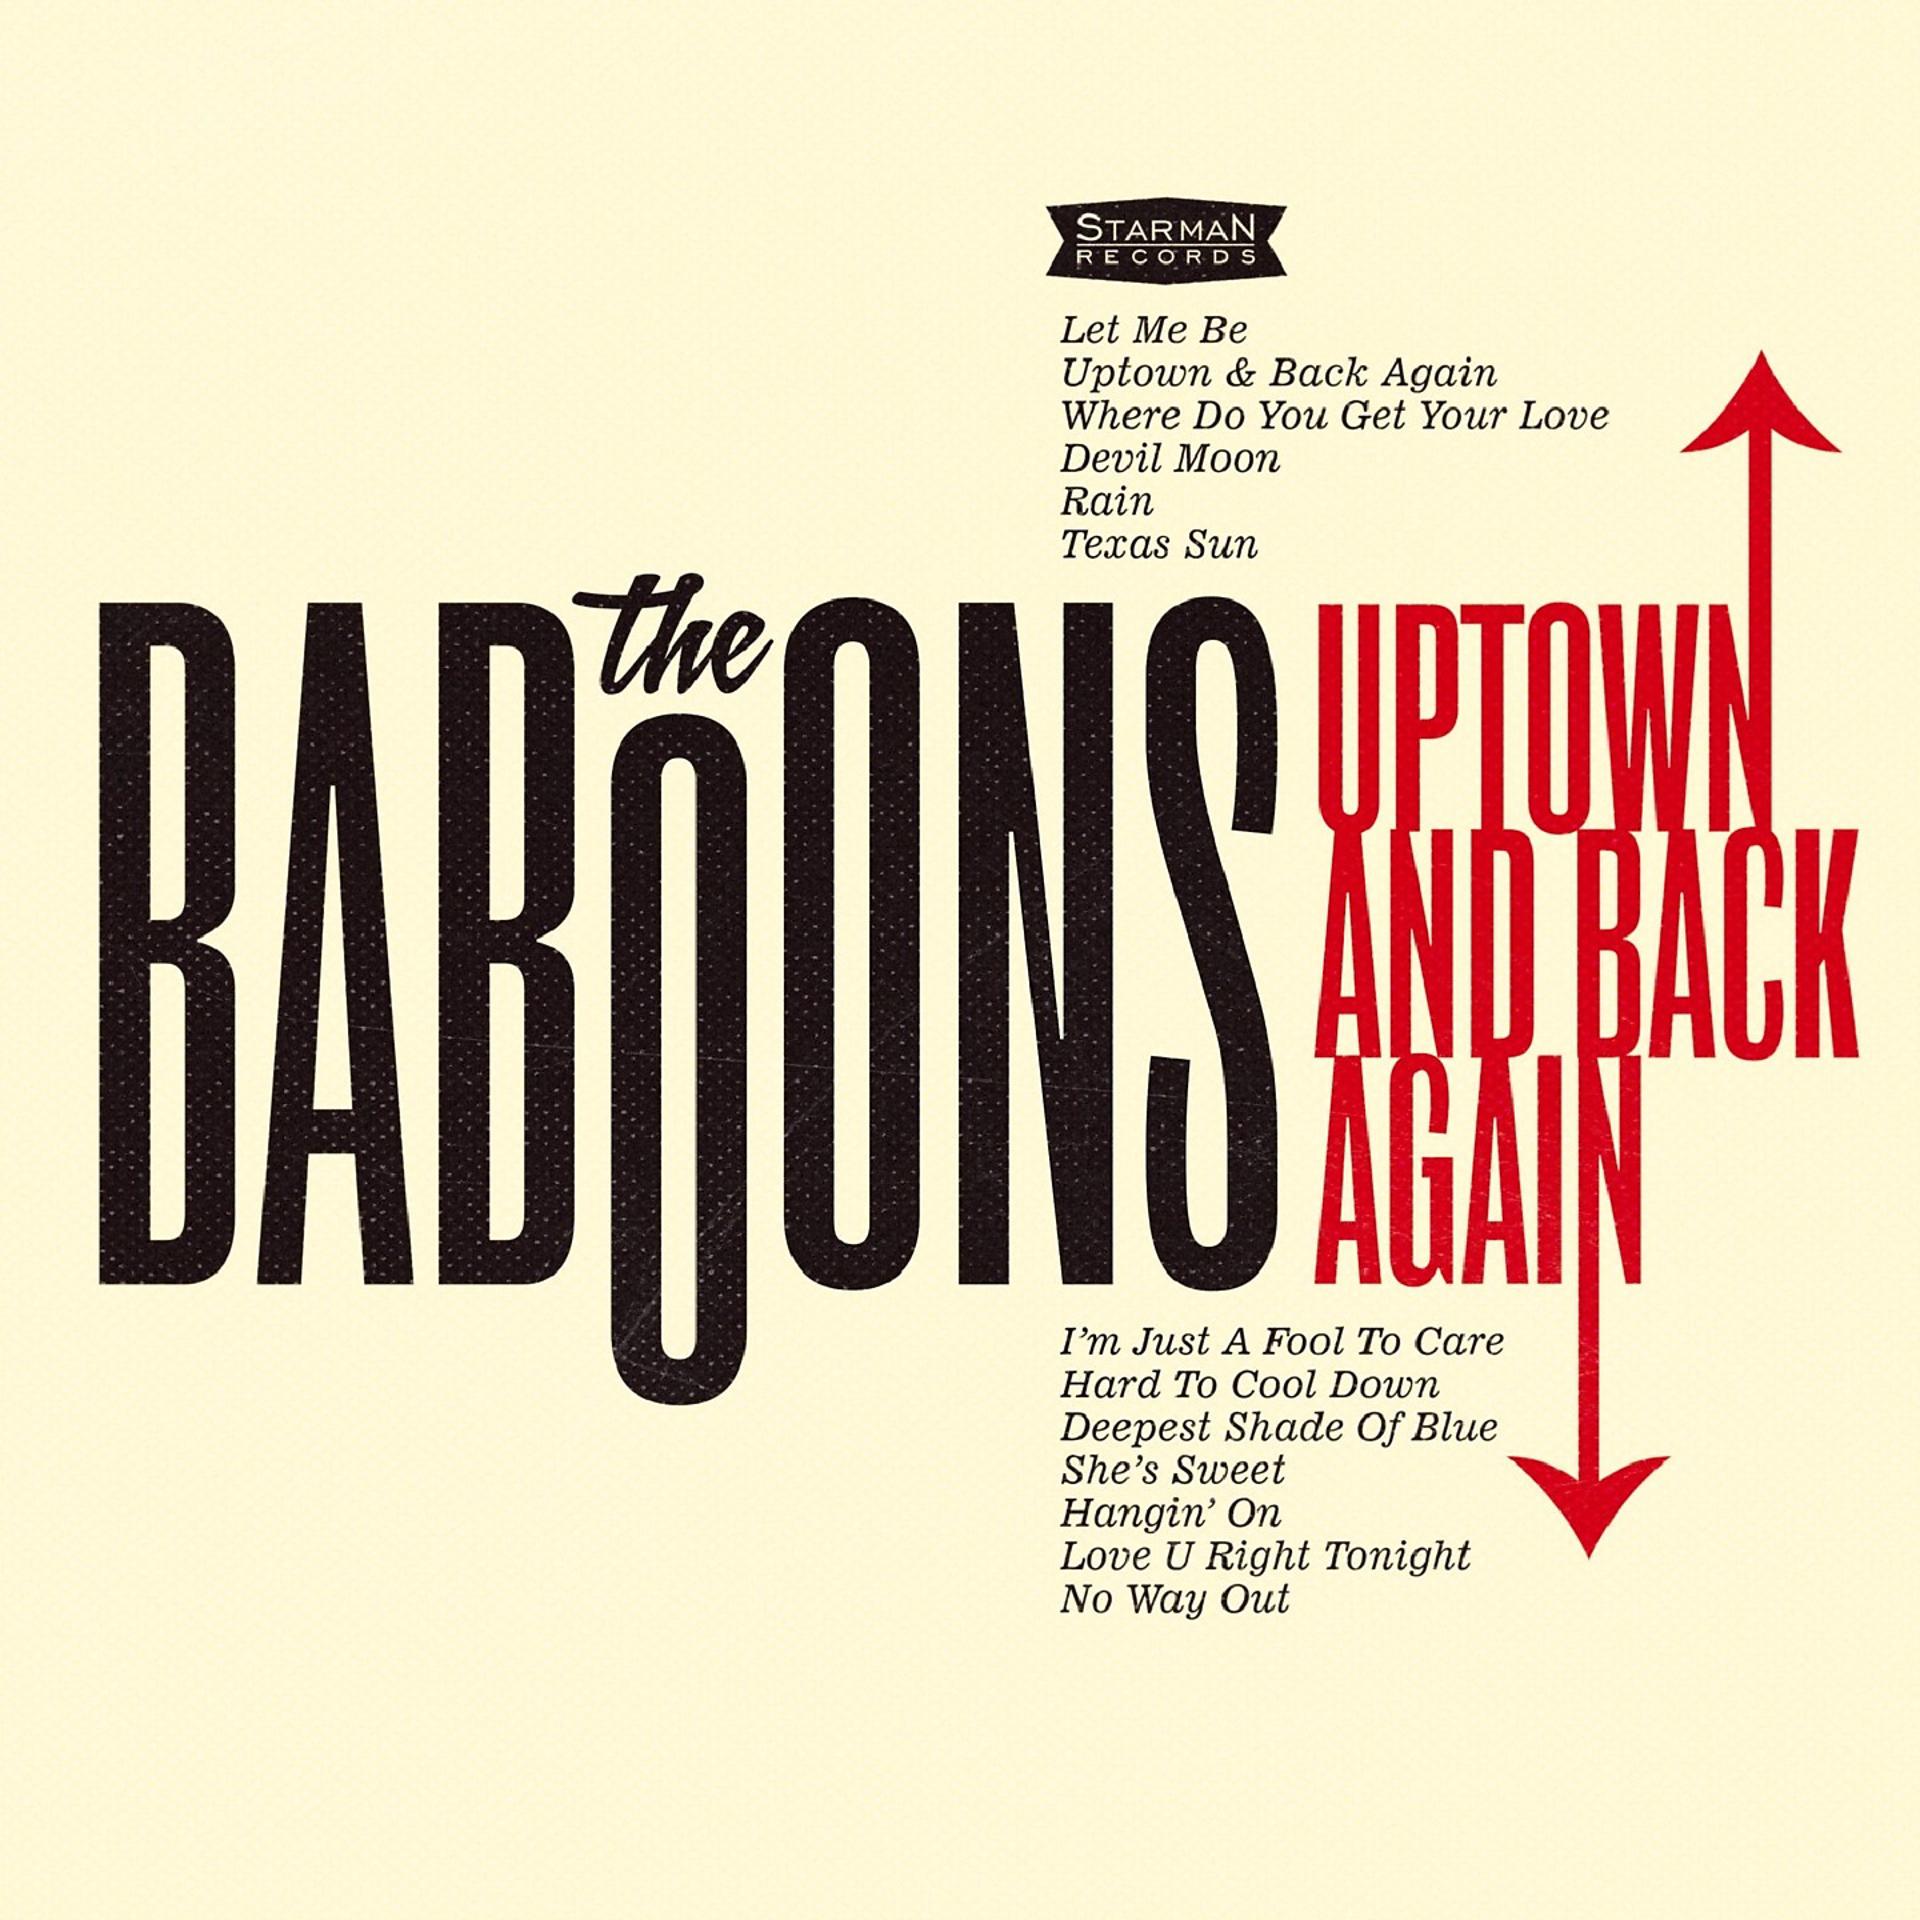 Right tonight. The Baboons группа. Uptown and back again (2015).